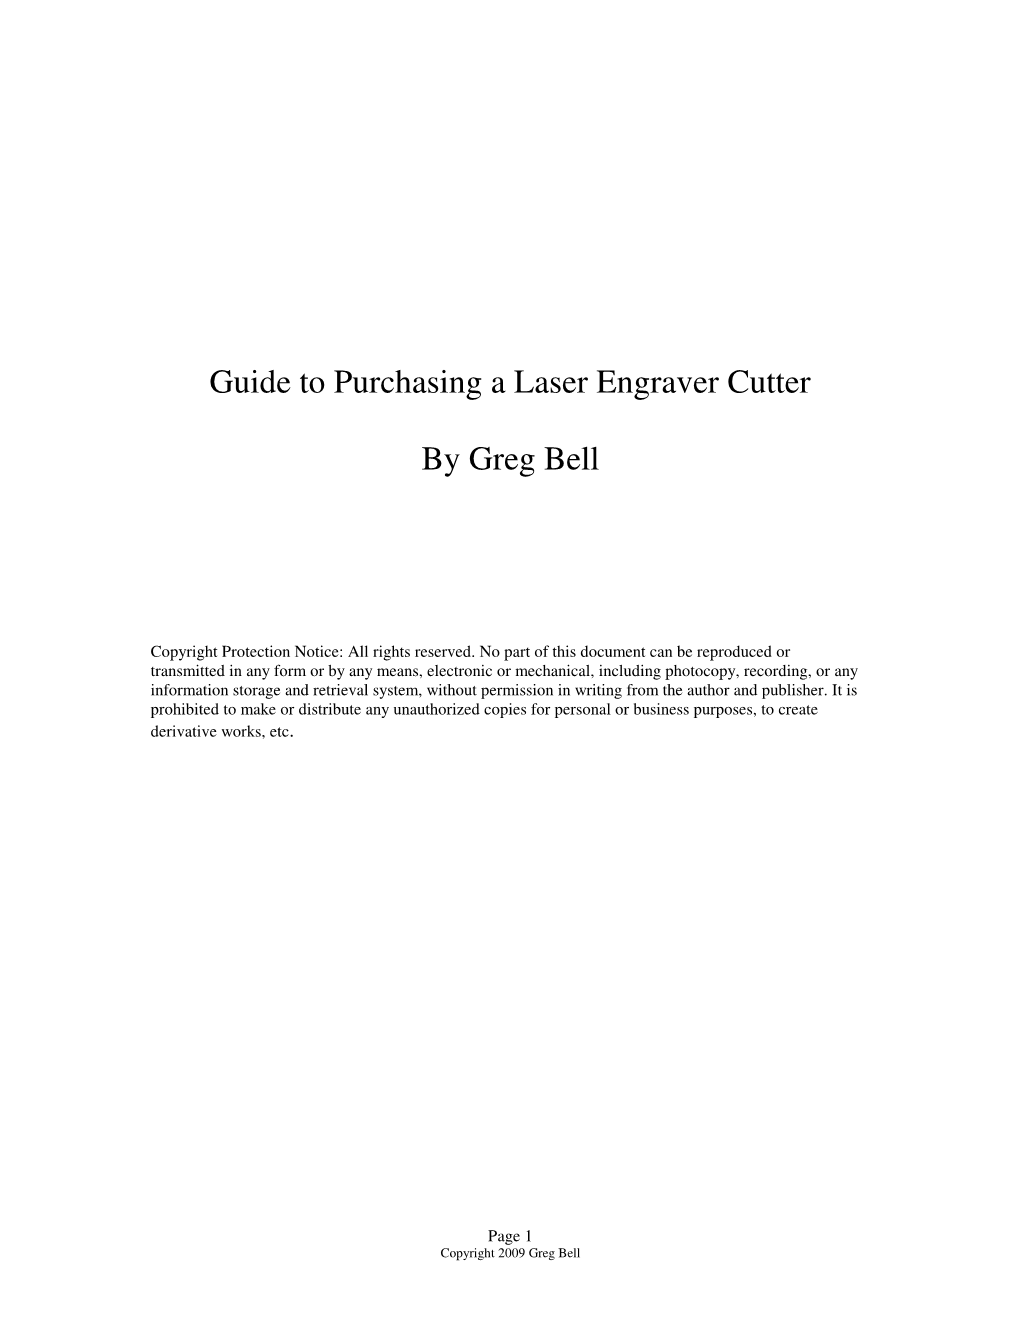 Guide to Purchasing a Laser Engraver Cutter by Greg Bell